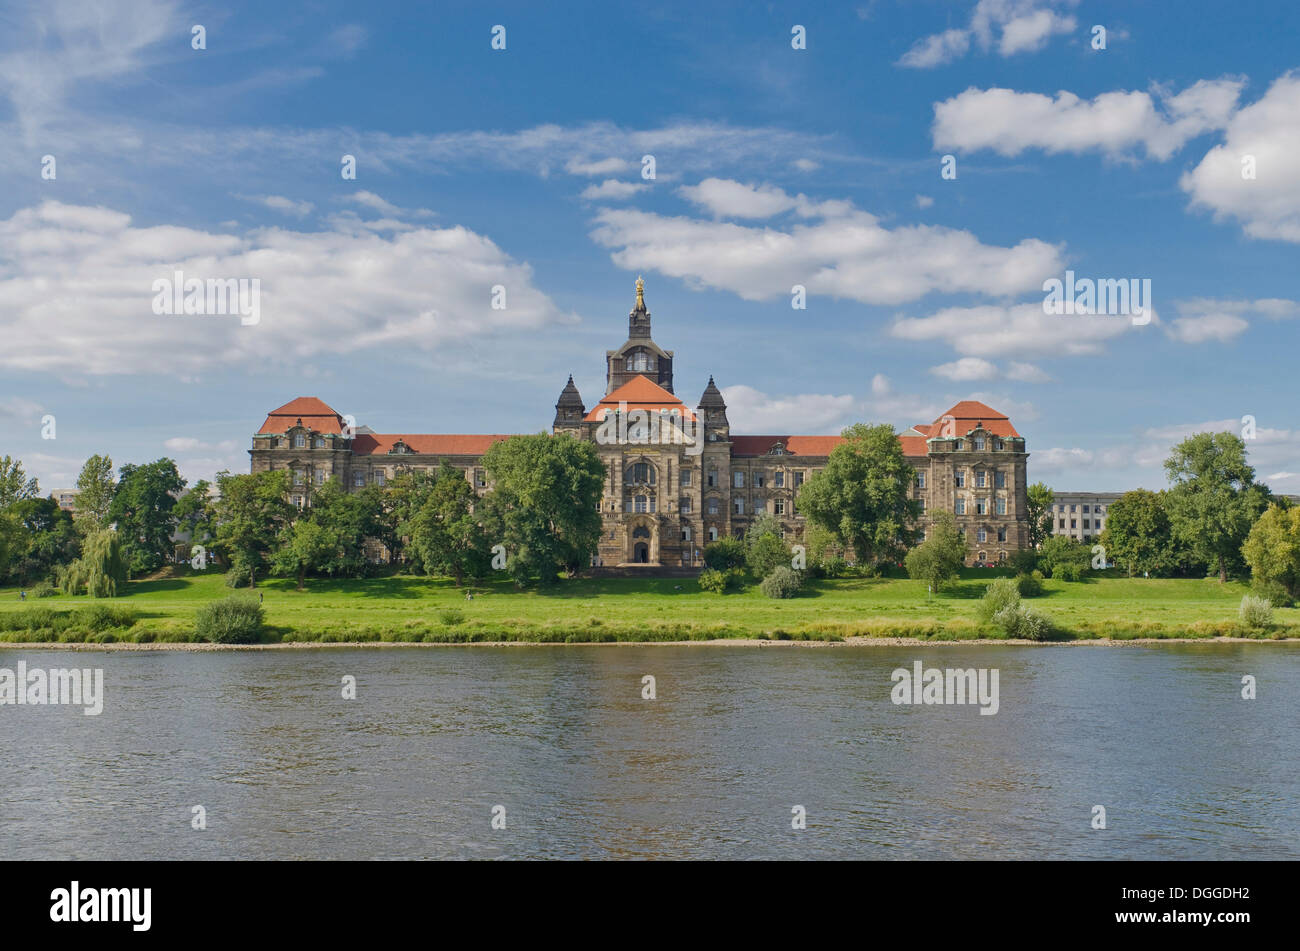 Saxonian state chancellery seen from across the river Elbe, Dresden, Saxony Stock Photo